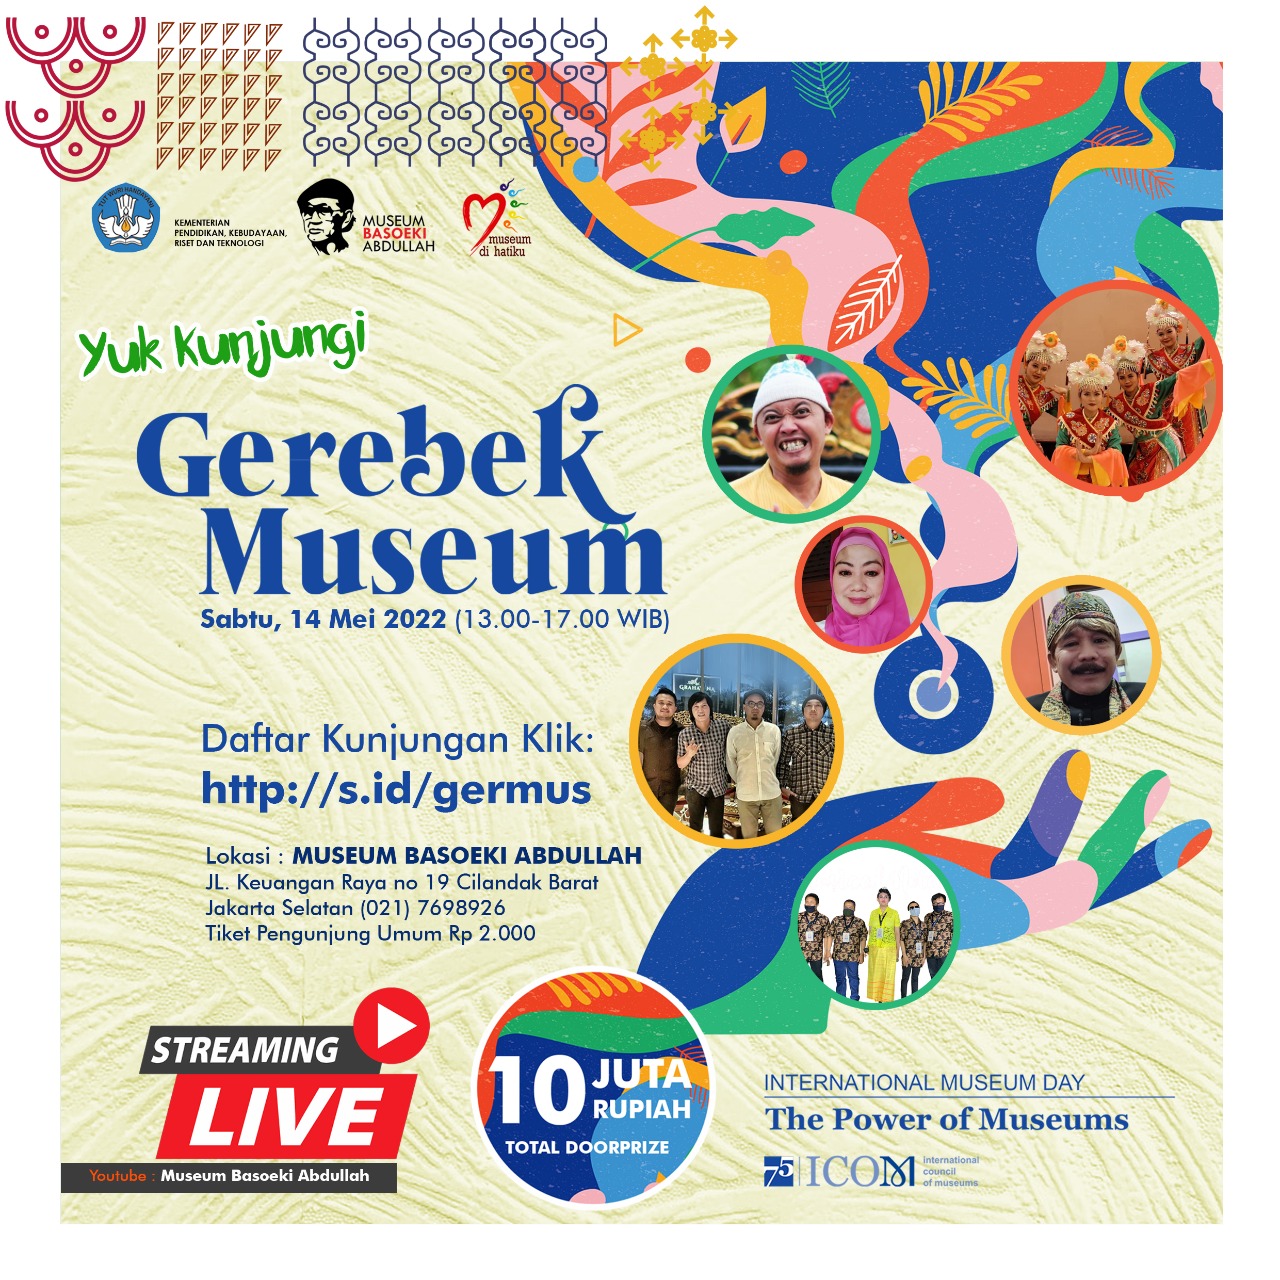 You are currently viewing Pre-Registrasi Gerebek Museum